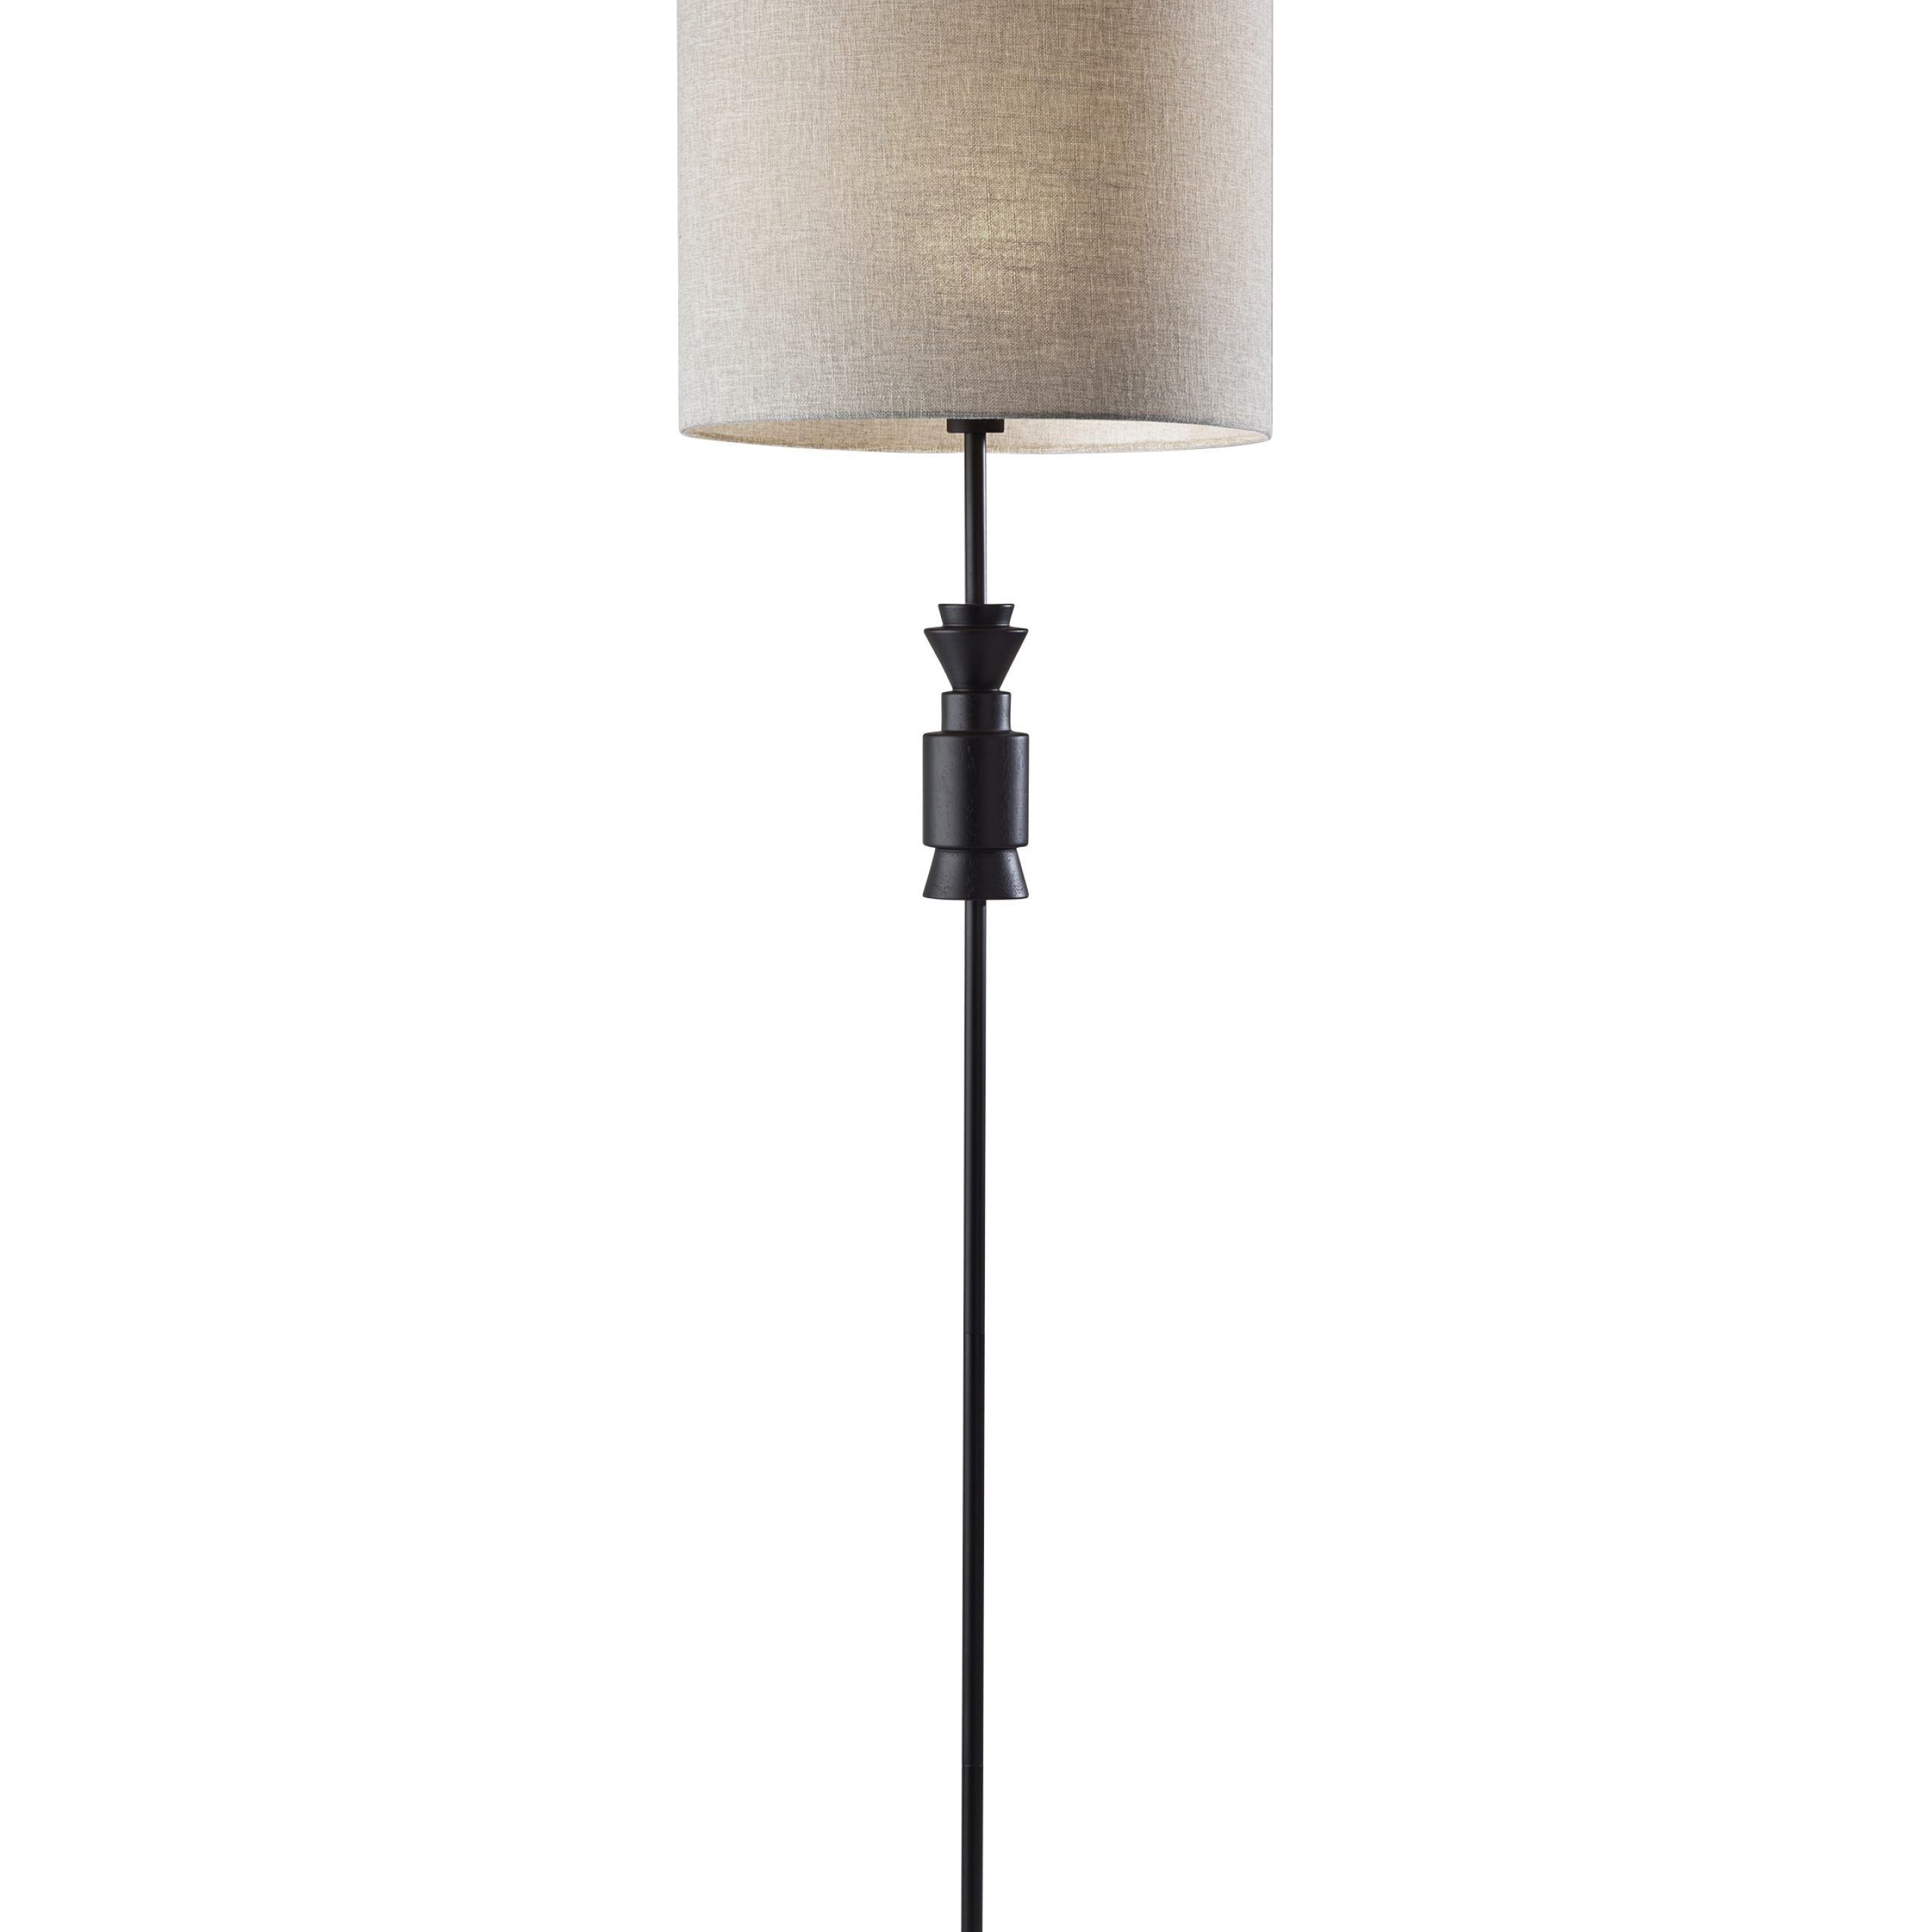 Adesso Elton Floor Lamp, Black Wood Base, Light Grey And White Textured  Fabric Shade – Walmart With Grey Textured Floor Lamps (View 10 of 15)